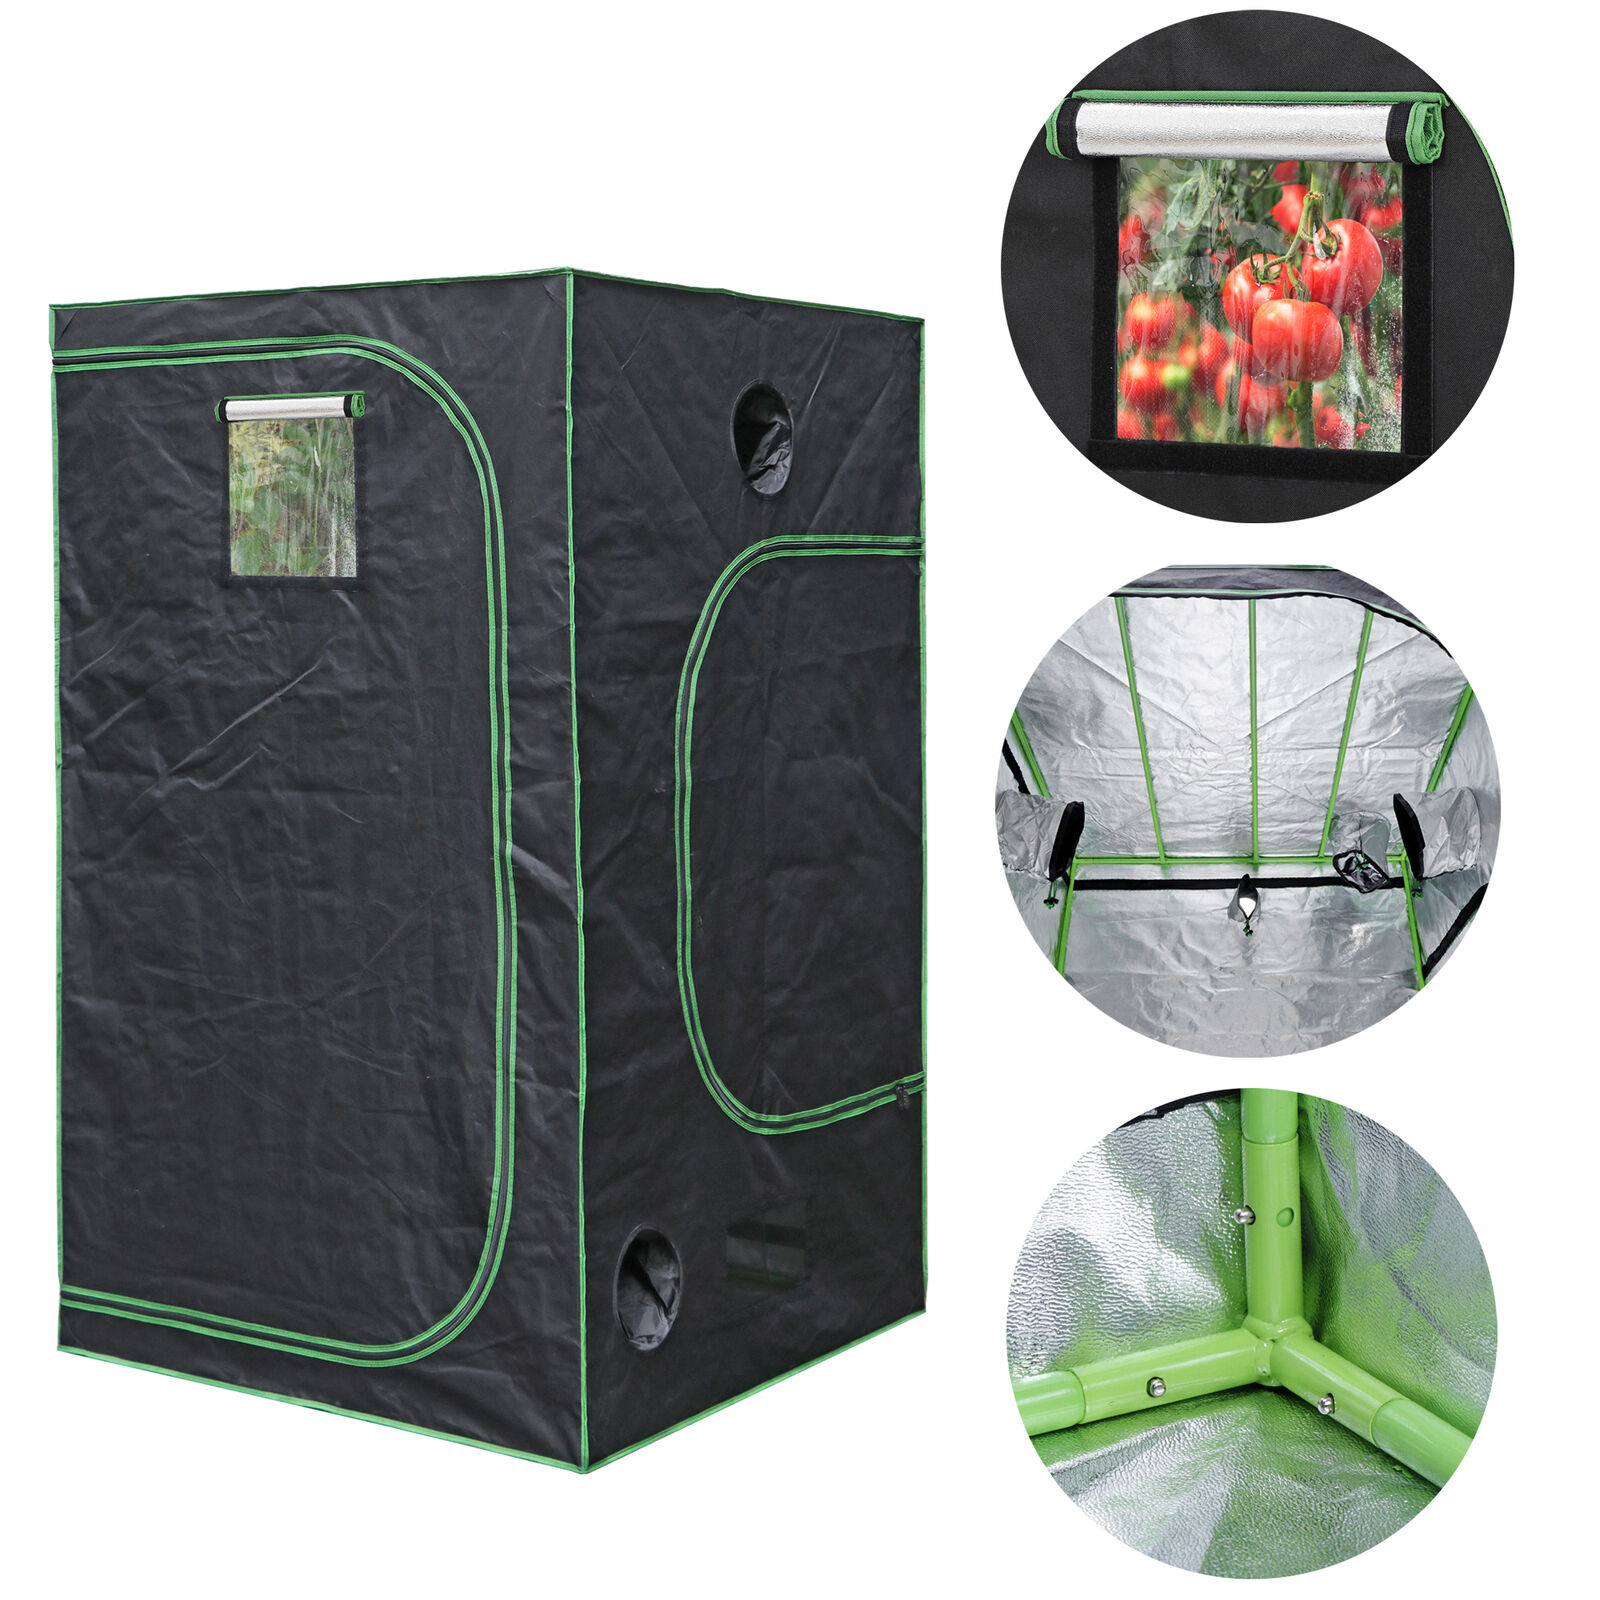 Grow Tent Box Seed Hydroponics with Window Indoor Horticulture Growing Room